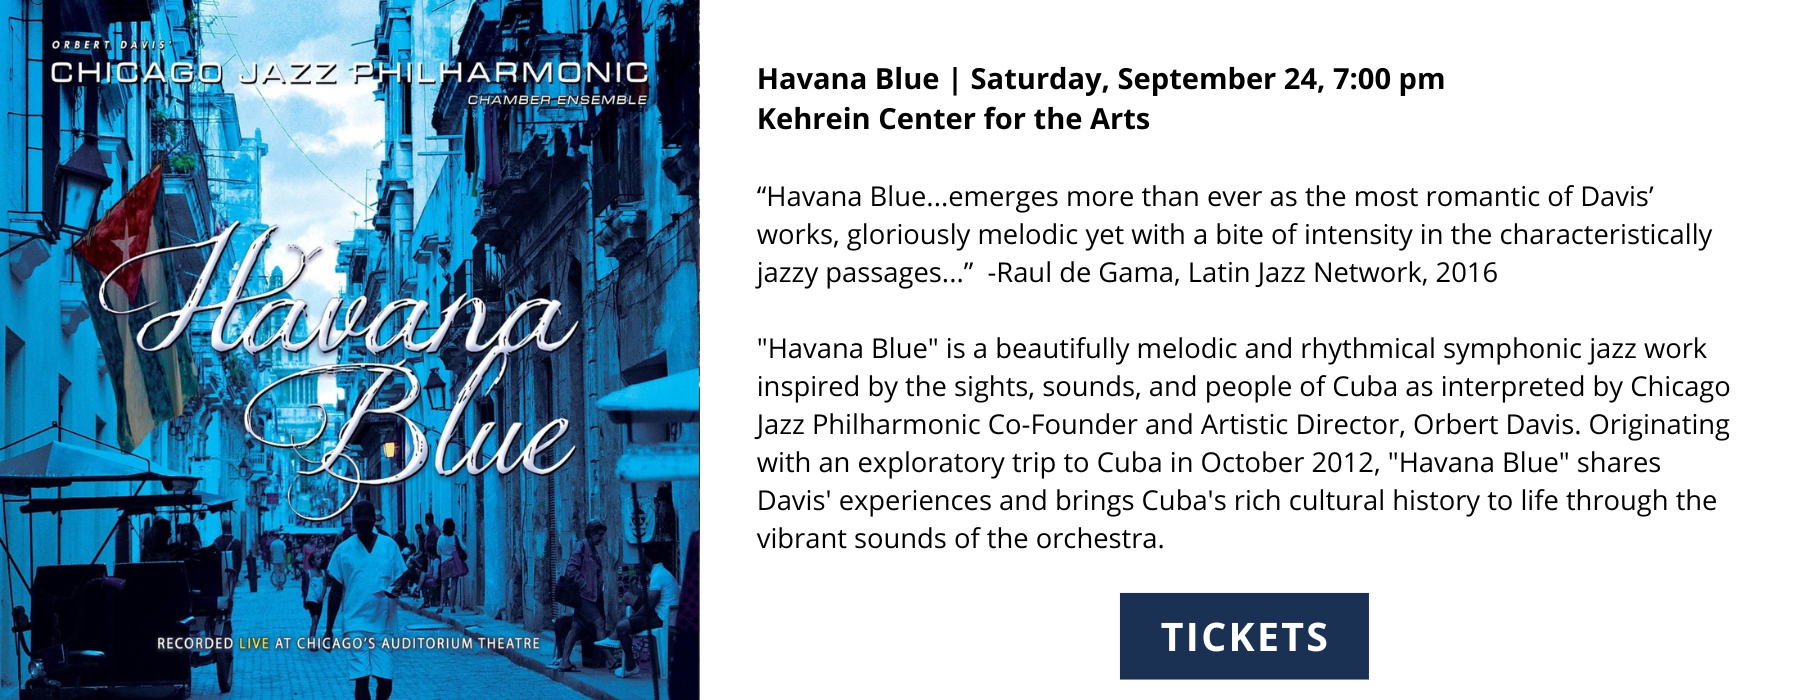 Havana Blue Saturday September 24 700 pm Kehrein Center for the Arts Havana Blueemerges more than ever as the most romantic of Davis works gloriously melodic yet with a bite of intensity in the characteristic 2